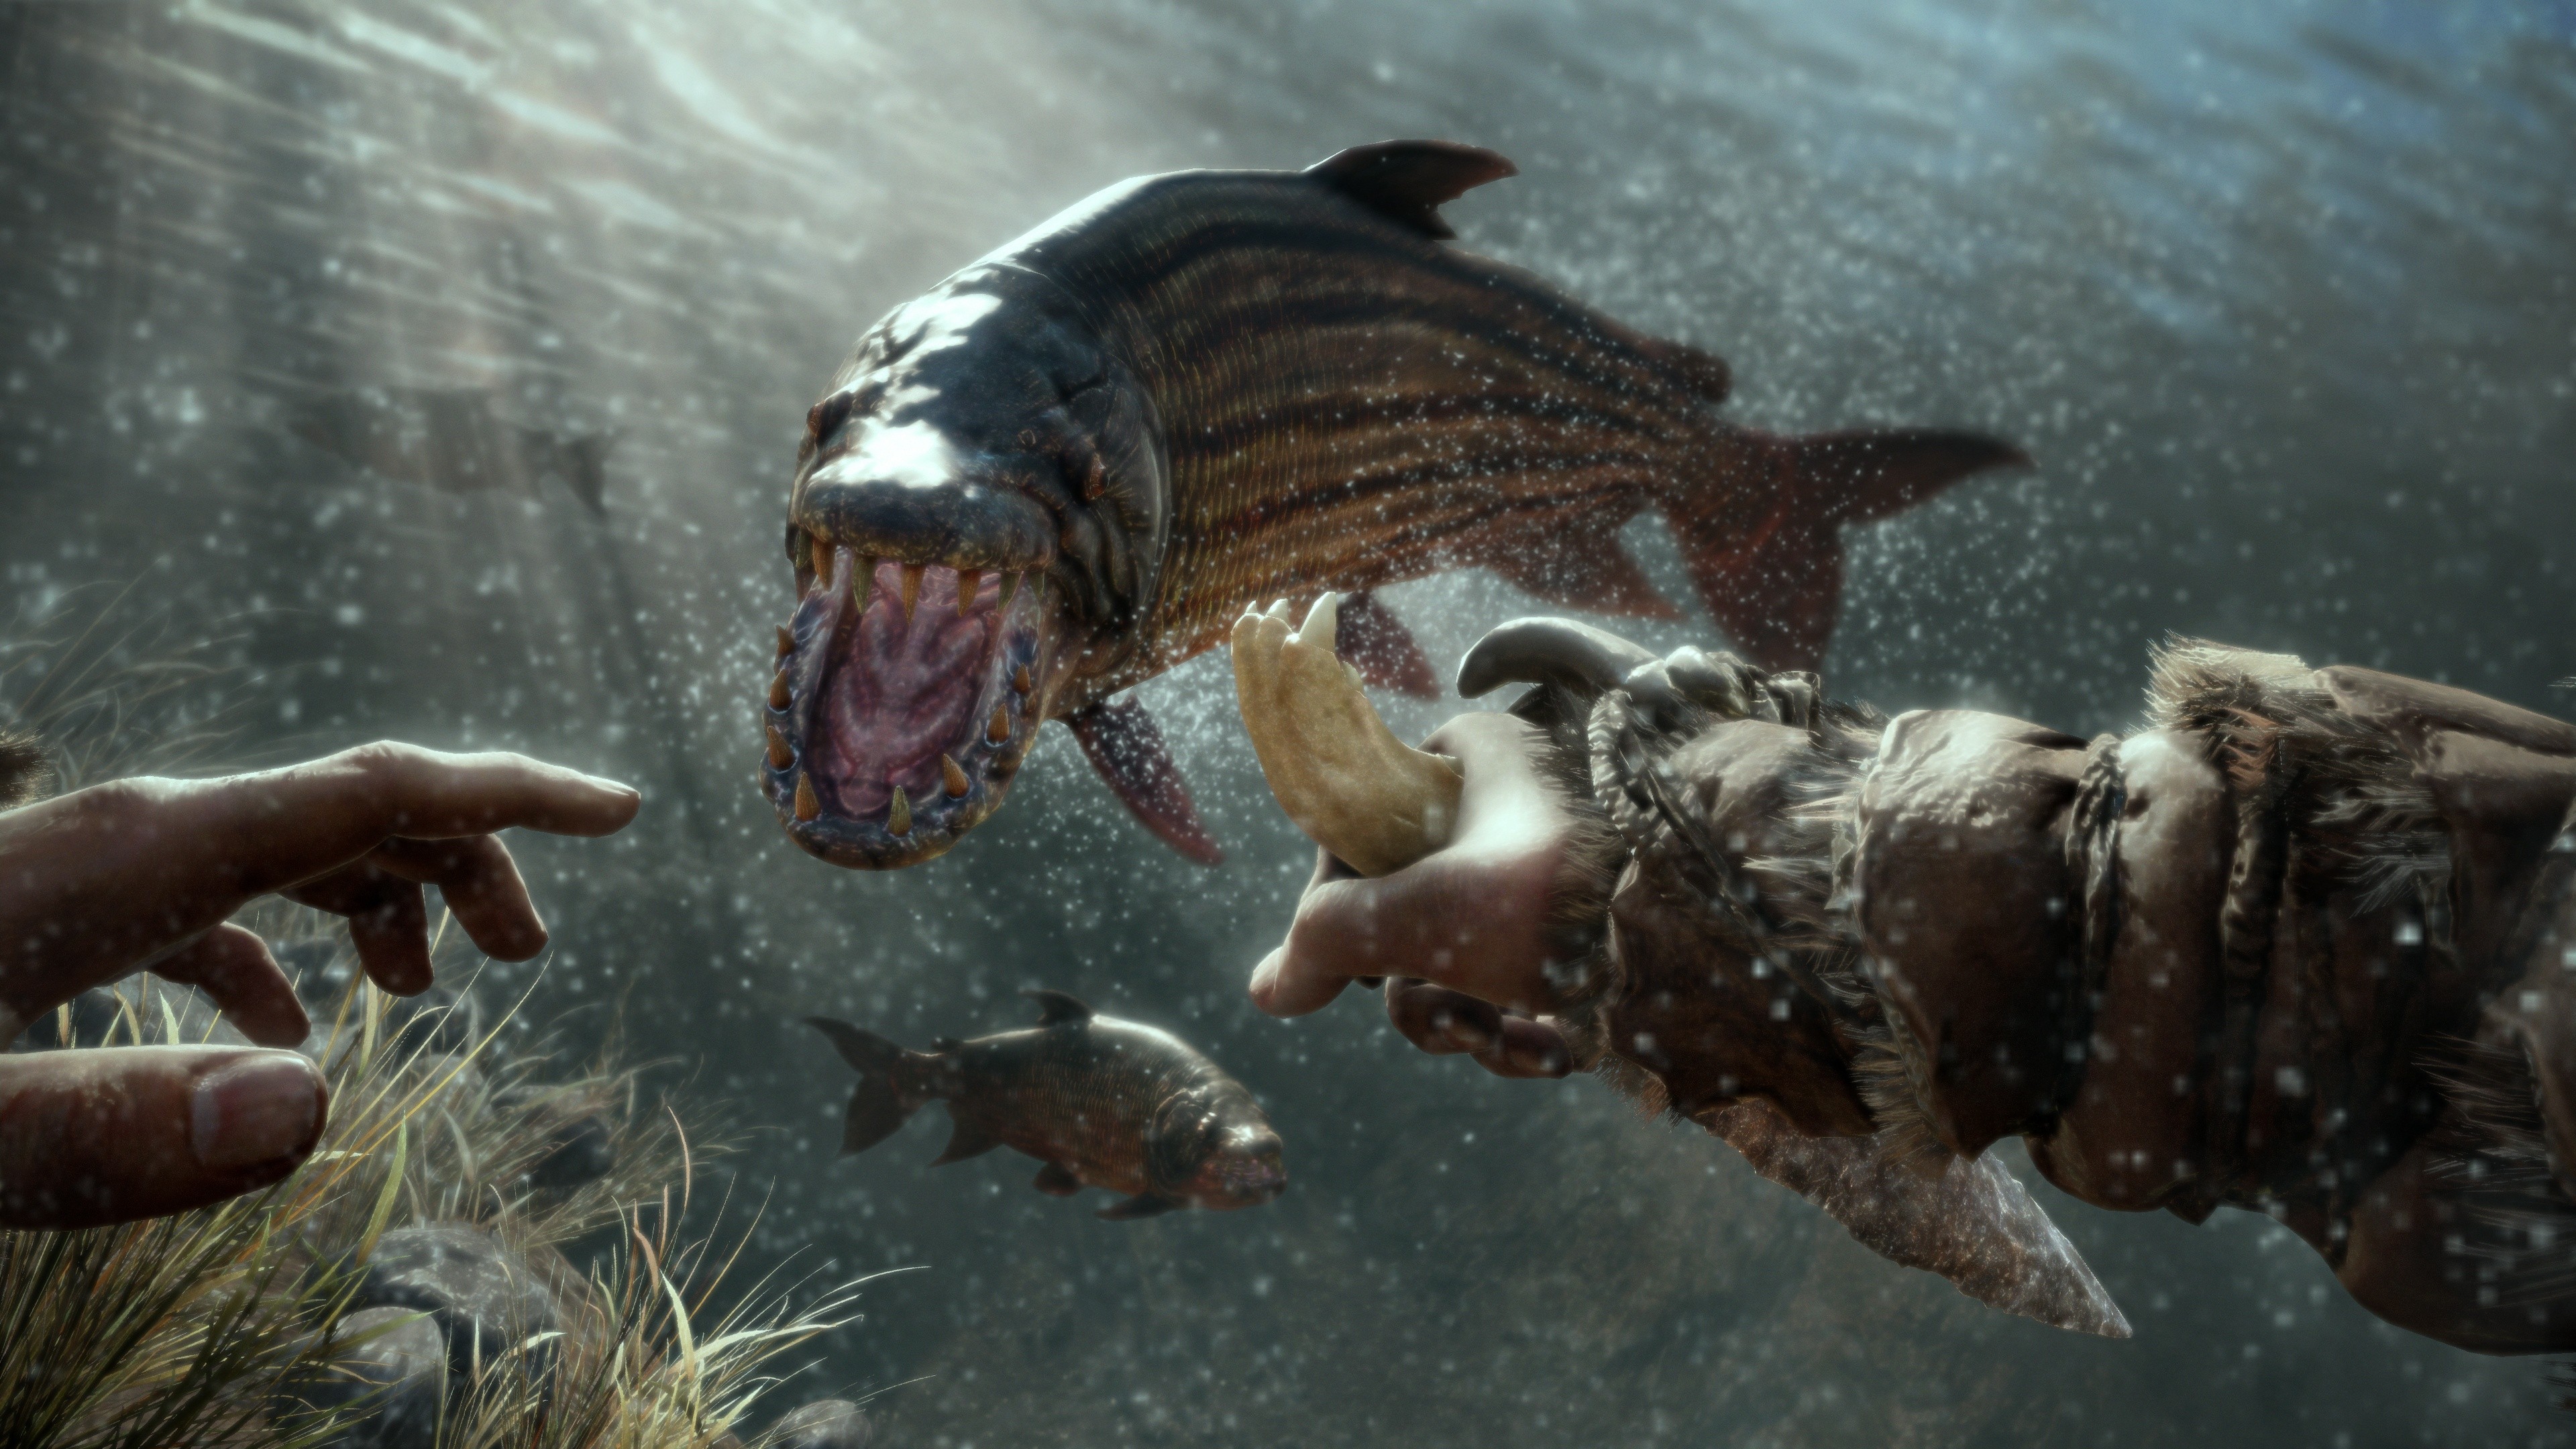 Wallpaper Far Cry Primal Demon Fish Best Game Pc Ps4 Xbox One